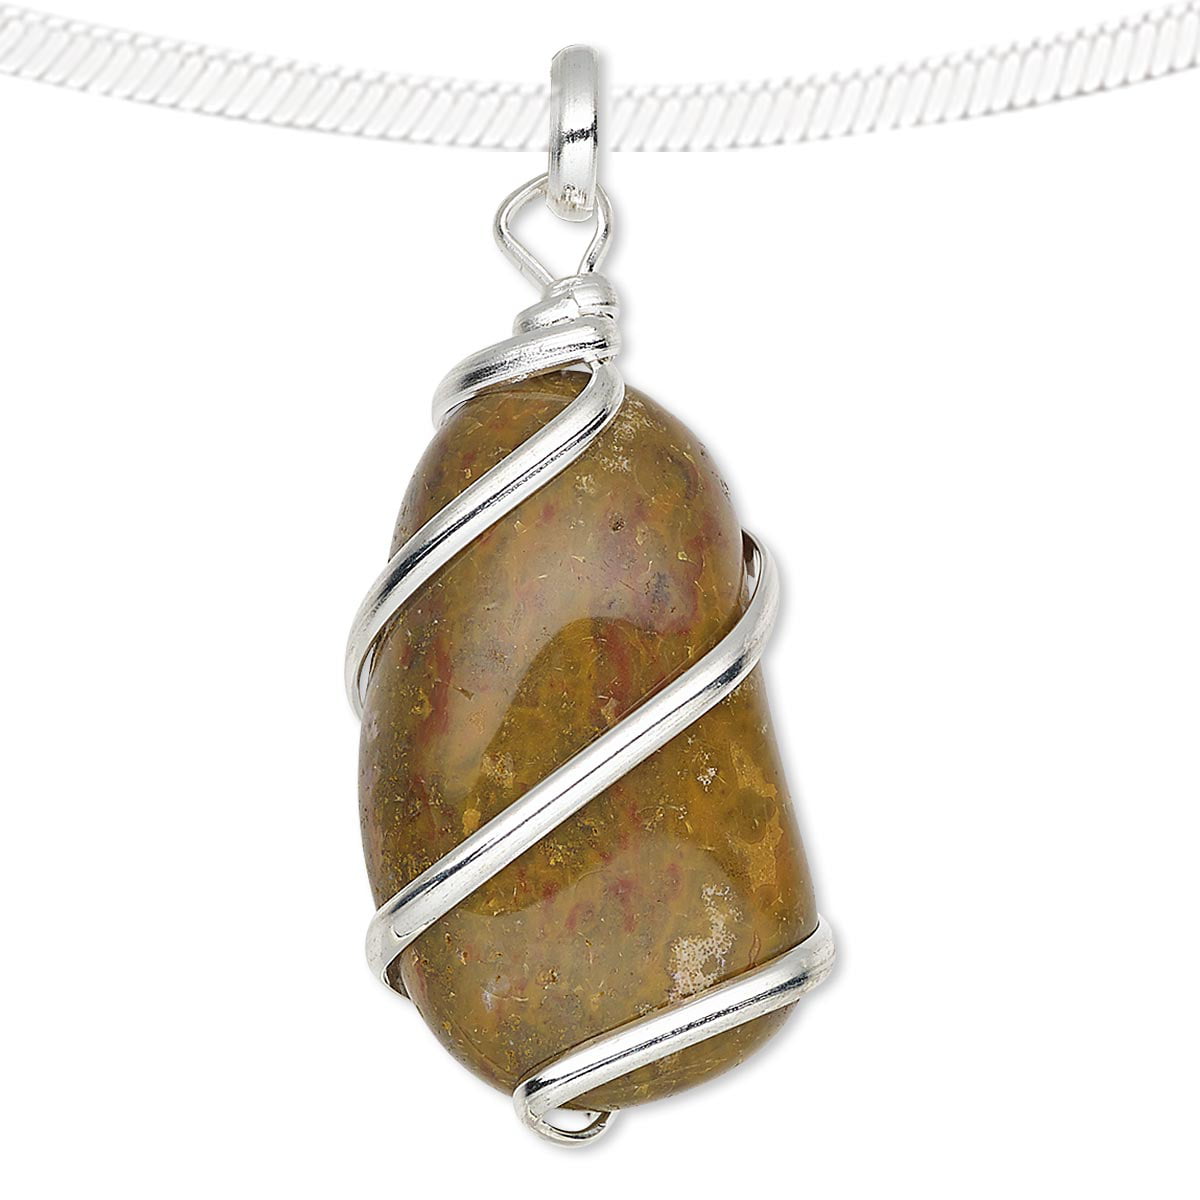 silver plated-jewellery-silver necklace your choice of length-gift for her- Pendant-Natural  yellow Jasper gemstone pendant